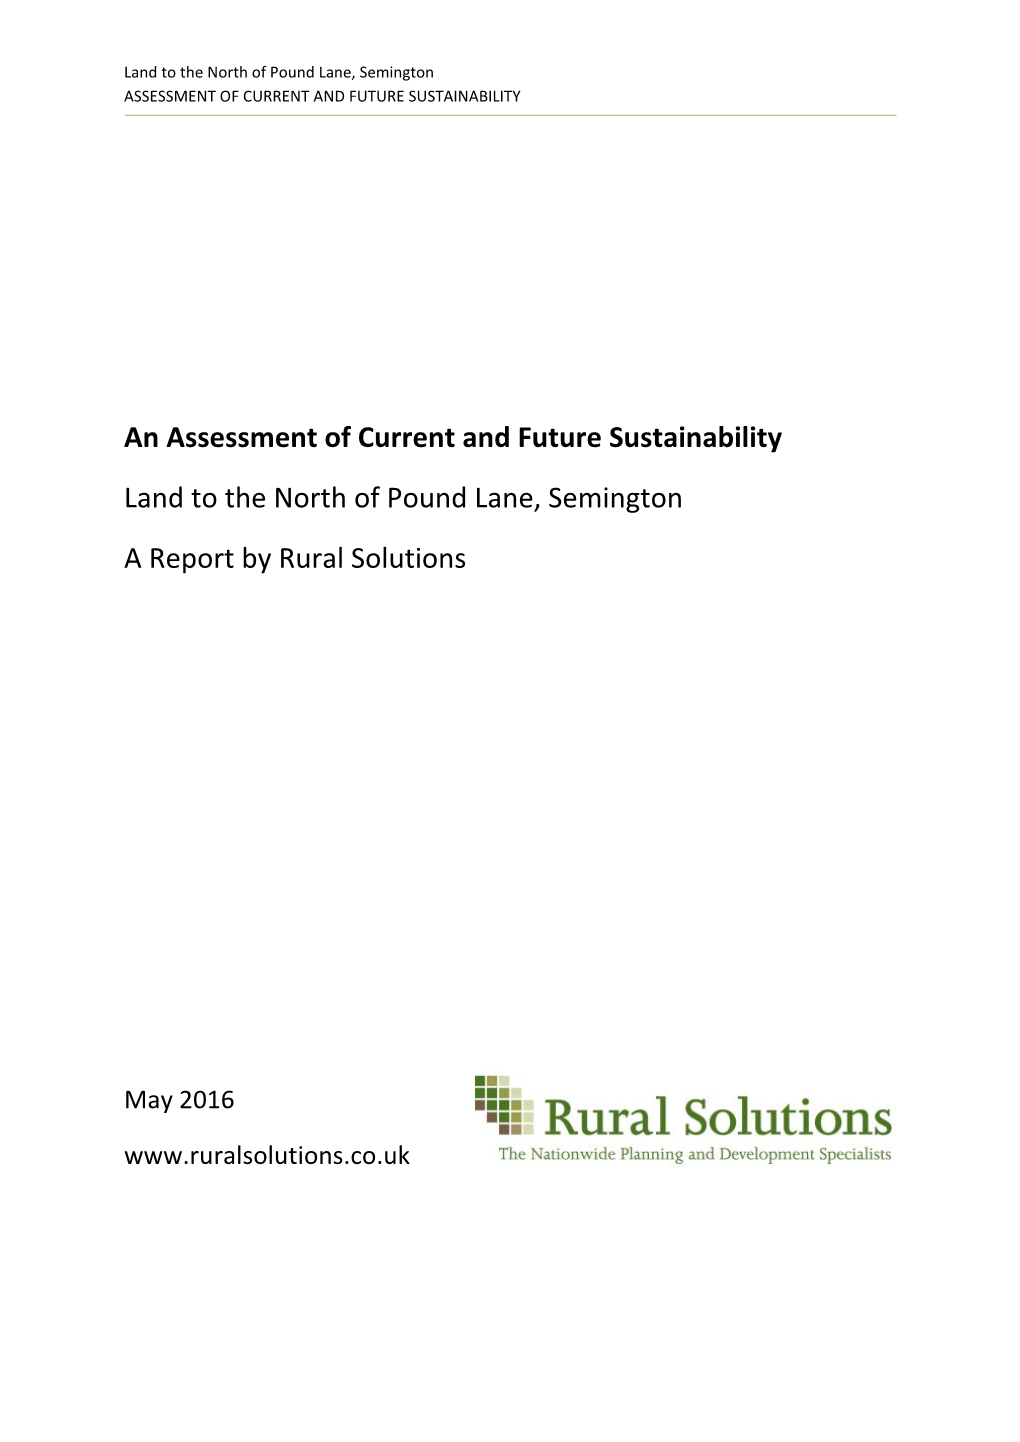 An Assessment of Current and Future Sustainability Land to the North of Pound Lane, Semington a Report by Rural Solutions